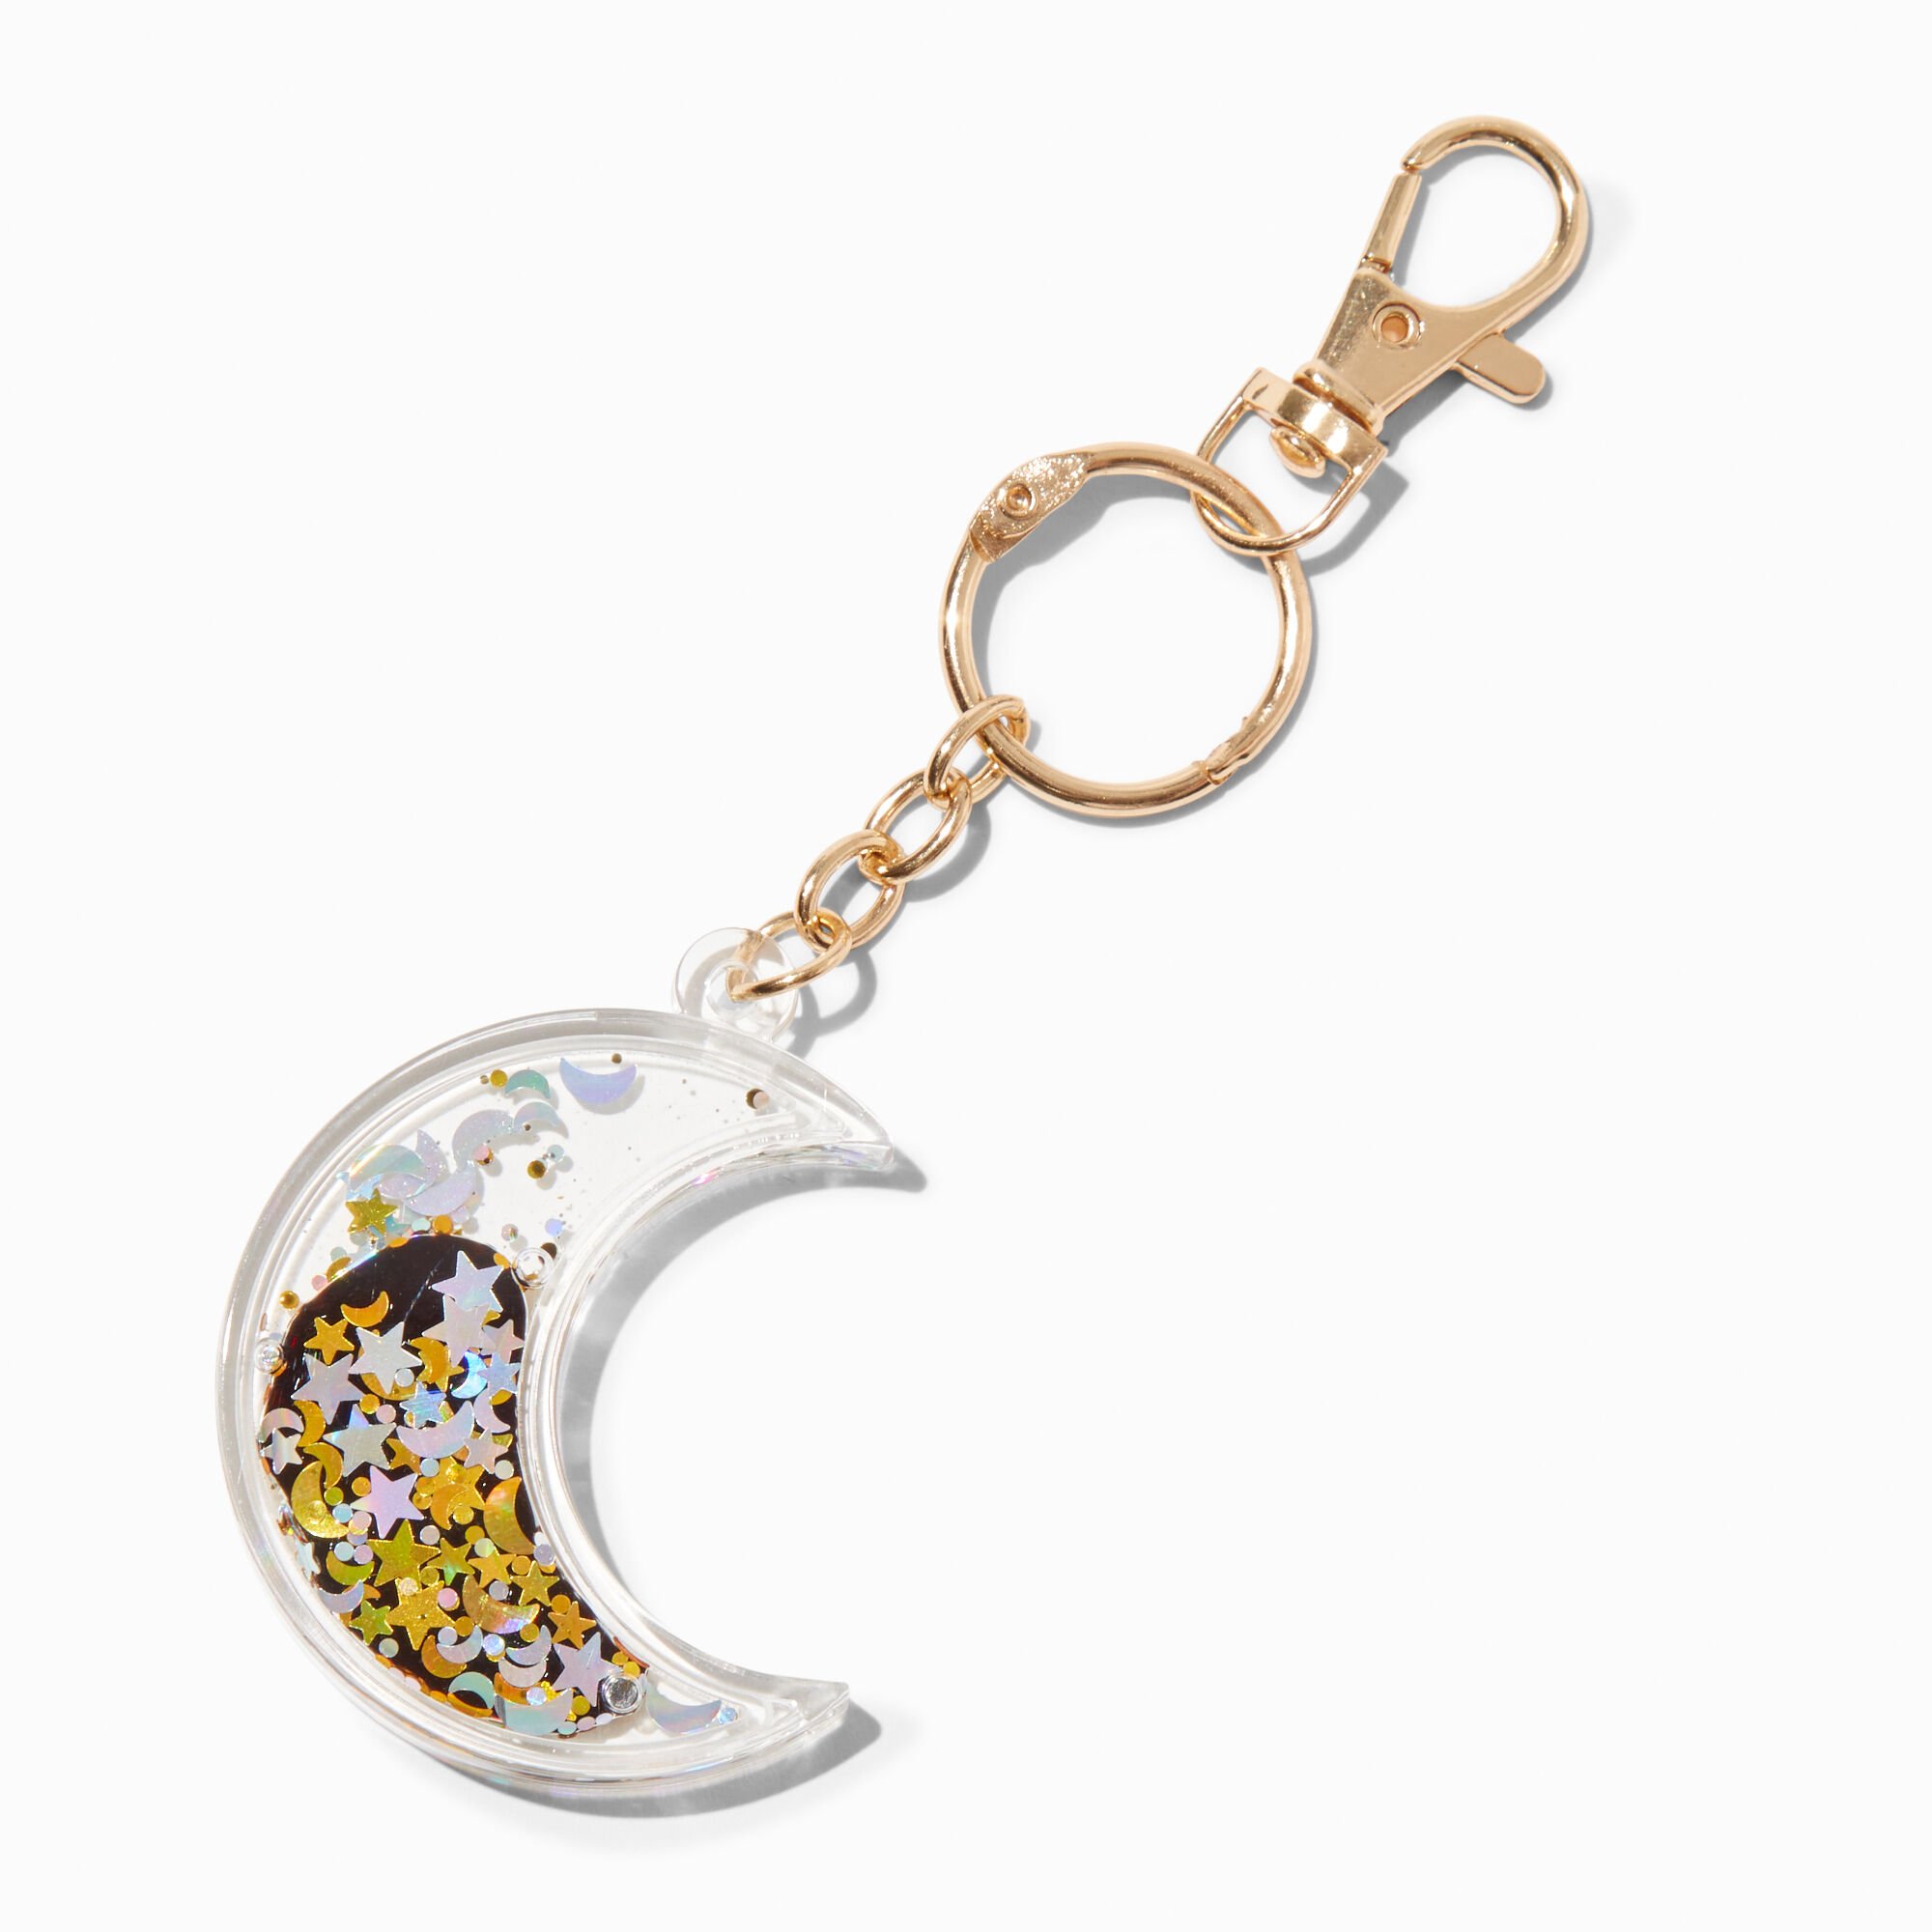 View Claires Moon WaterFilled Glitter Keyring information